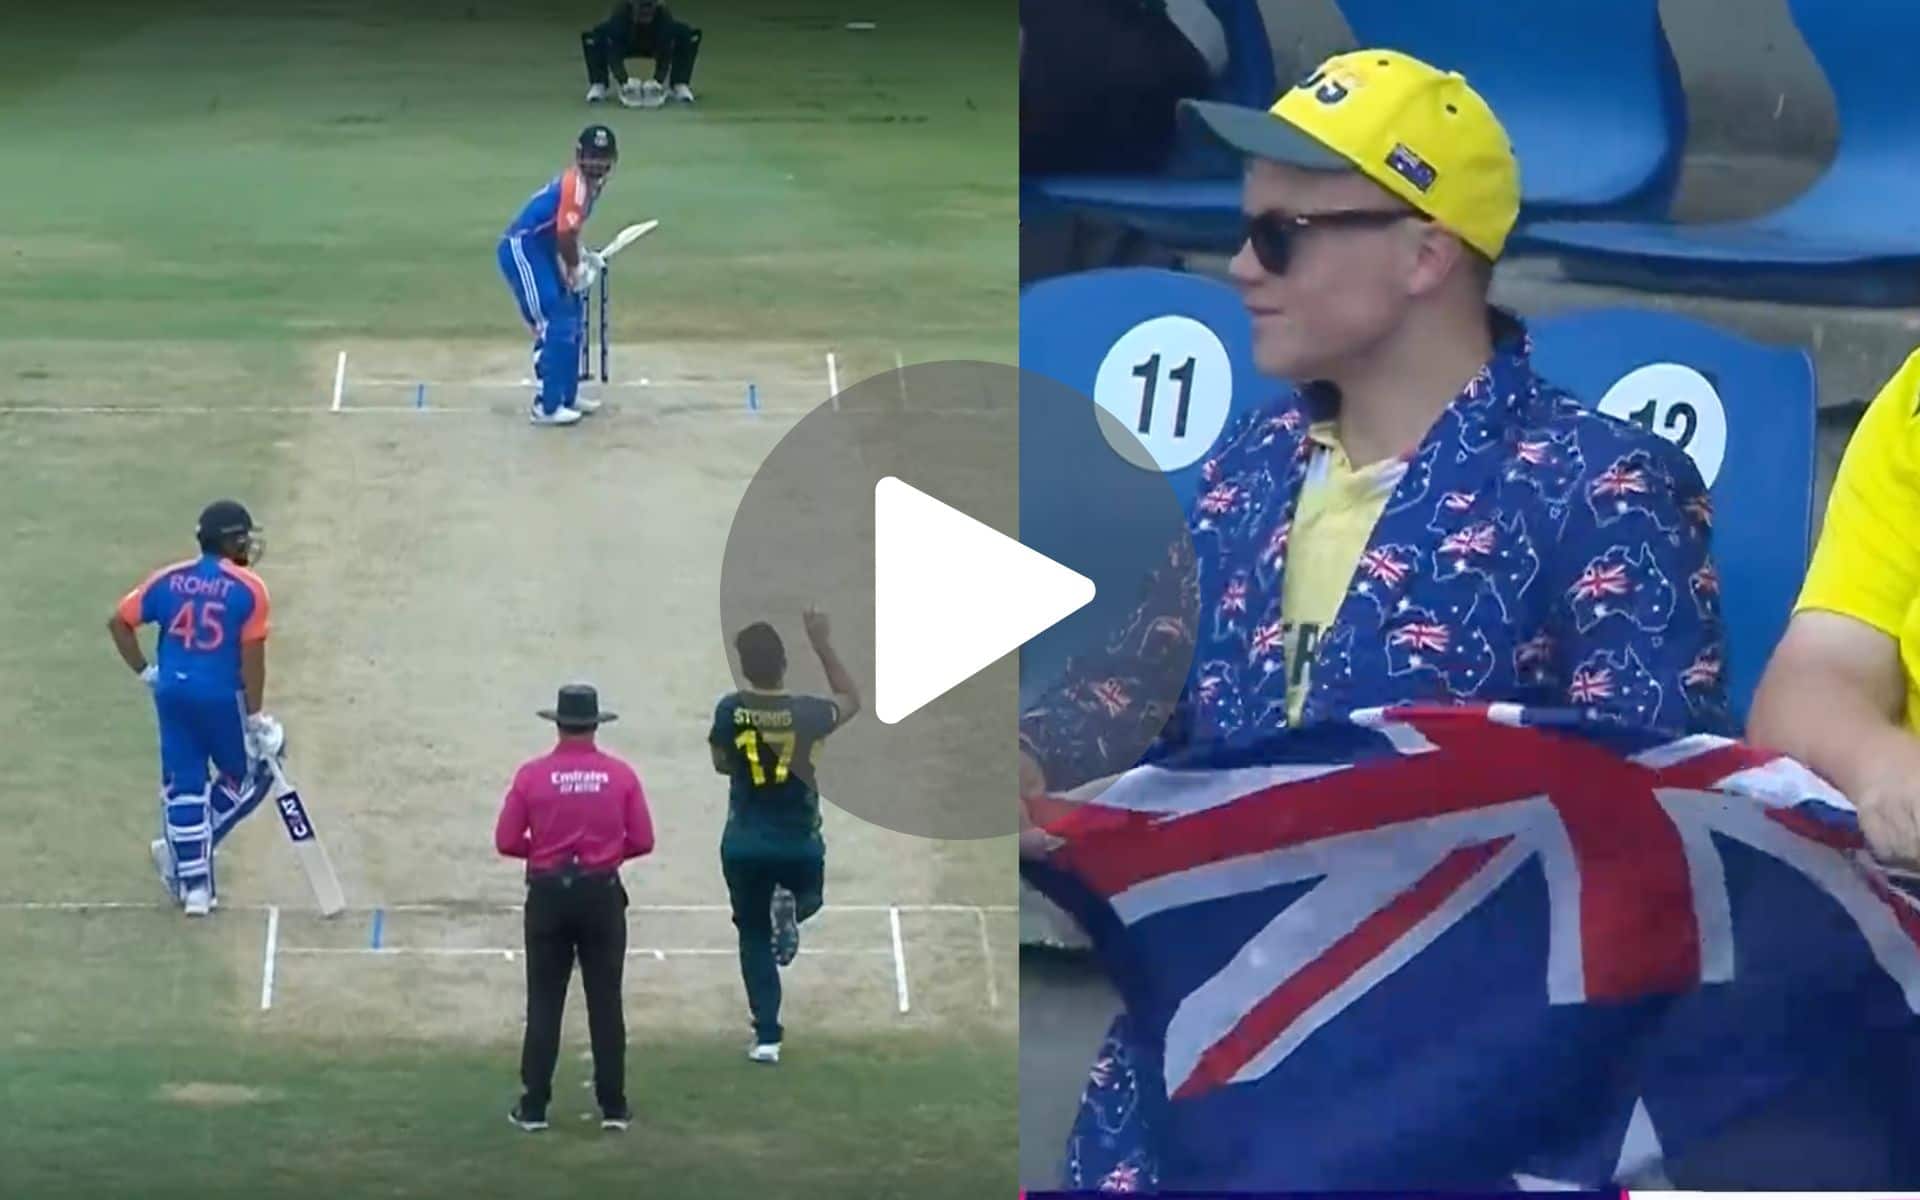 [Watch] Pant Fails To Replicate Rohit-like Powerhitting; Aussie Superfan Makes A Passionate Roar